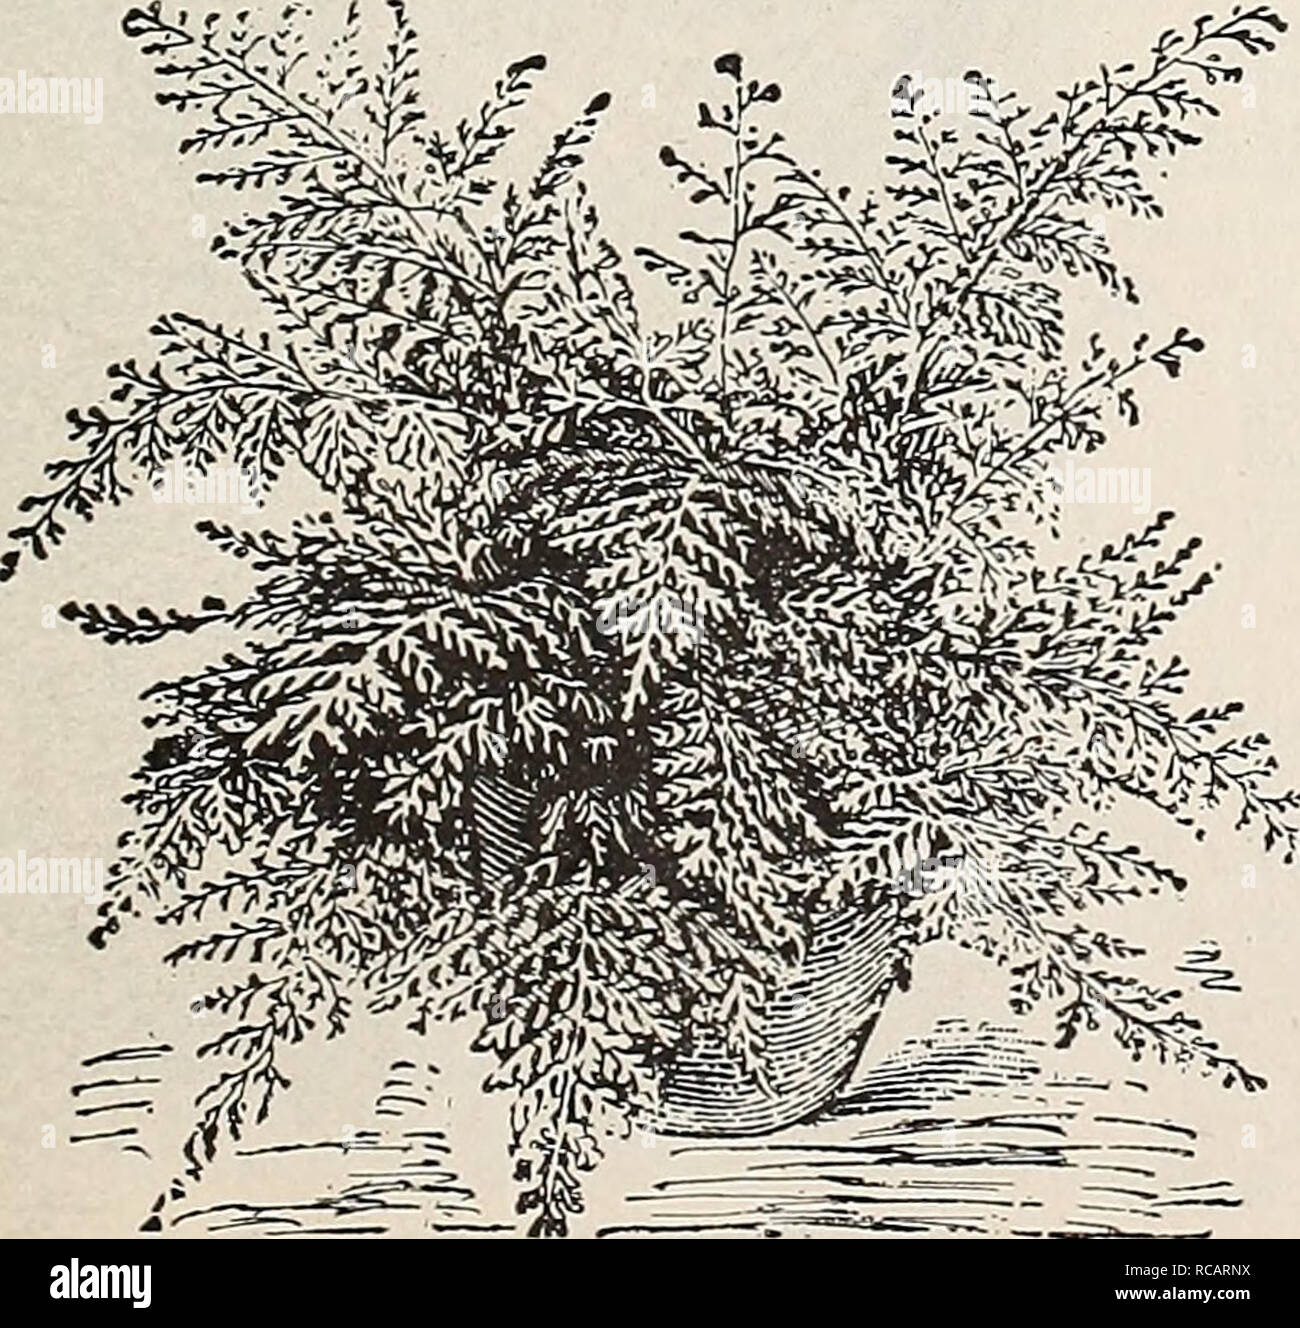 . Dreer's autumn catalogue : 1895. Bulbs (Plants) Catalogs; Flowers Seeds Catalogs; Gardening Equipment and supplies Catalogs; Nurseries (Horticulture) Catalogs; Fruit Seeds Catalogs. Davallia Stricta. Adiantum Cuneatum Grandiceps. Davallia Fijiensis Plumosa. A charming evergreen Fern, with gracefully arching fronds ; of easy and rapid growth. 25 to 50 cts. each. Nephrolepis Kxaliala. This is the popular Boston Sword Fern, the true long-leaved variety which is used so exten- sively in the eastern states ; a most useful house Fern. 25 and 50 cts. each, N. Davalleoides Furcans. A beautiful and d Stock Photo